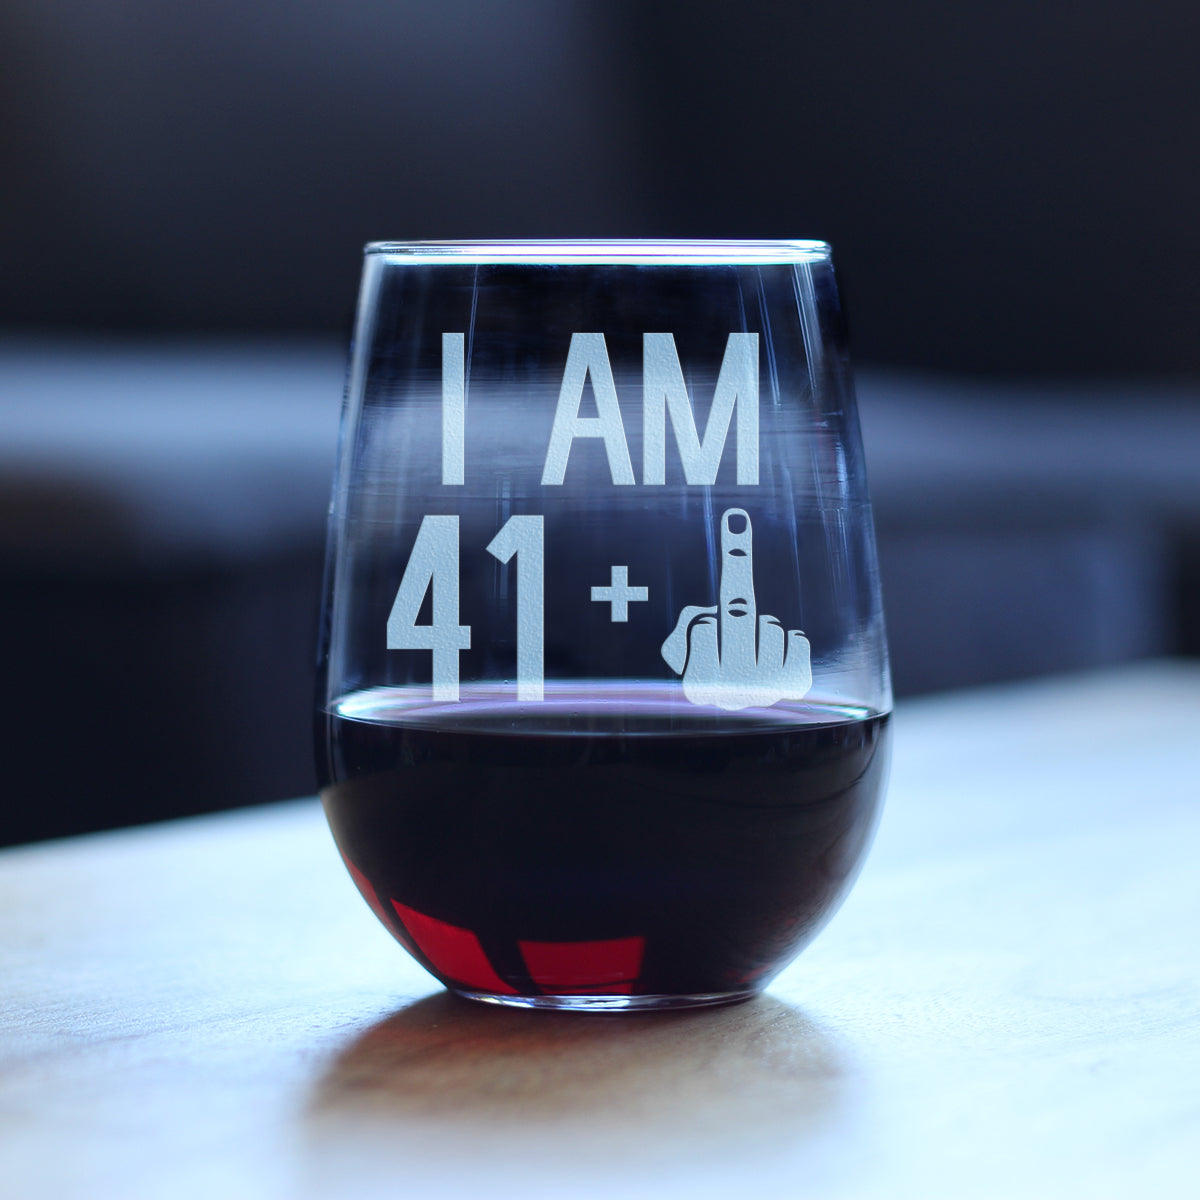 41 + 1 Middle Finger - 42nd Birthday Stemless Wine Glass - Funny Glass for Men and Women Turning 42 - Large Size Wine Glass